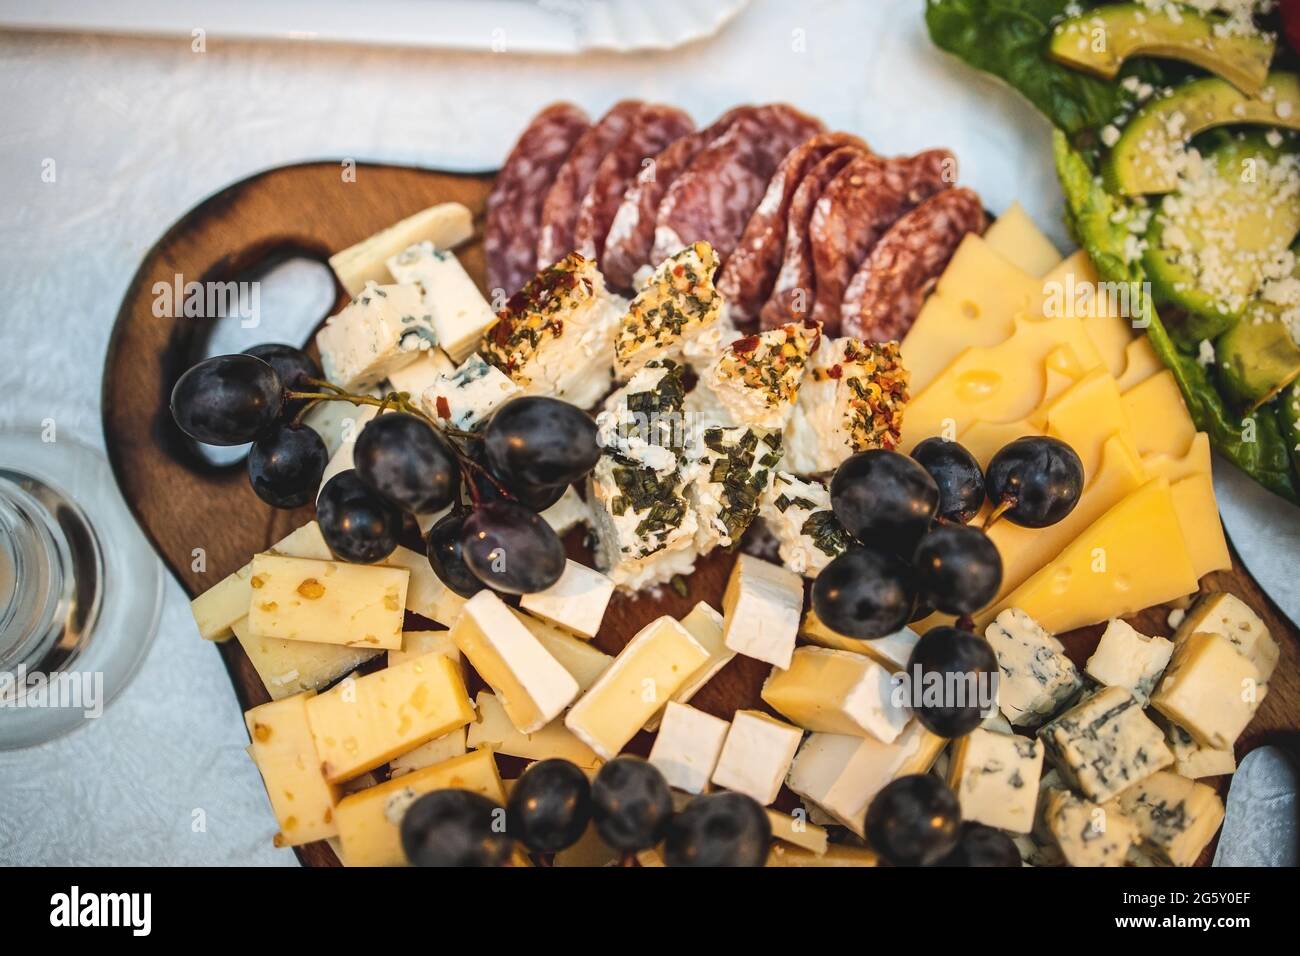 Cheese and meat platter on a wooden board on a festive table. View from above Stock Photo